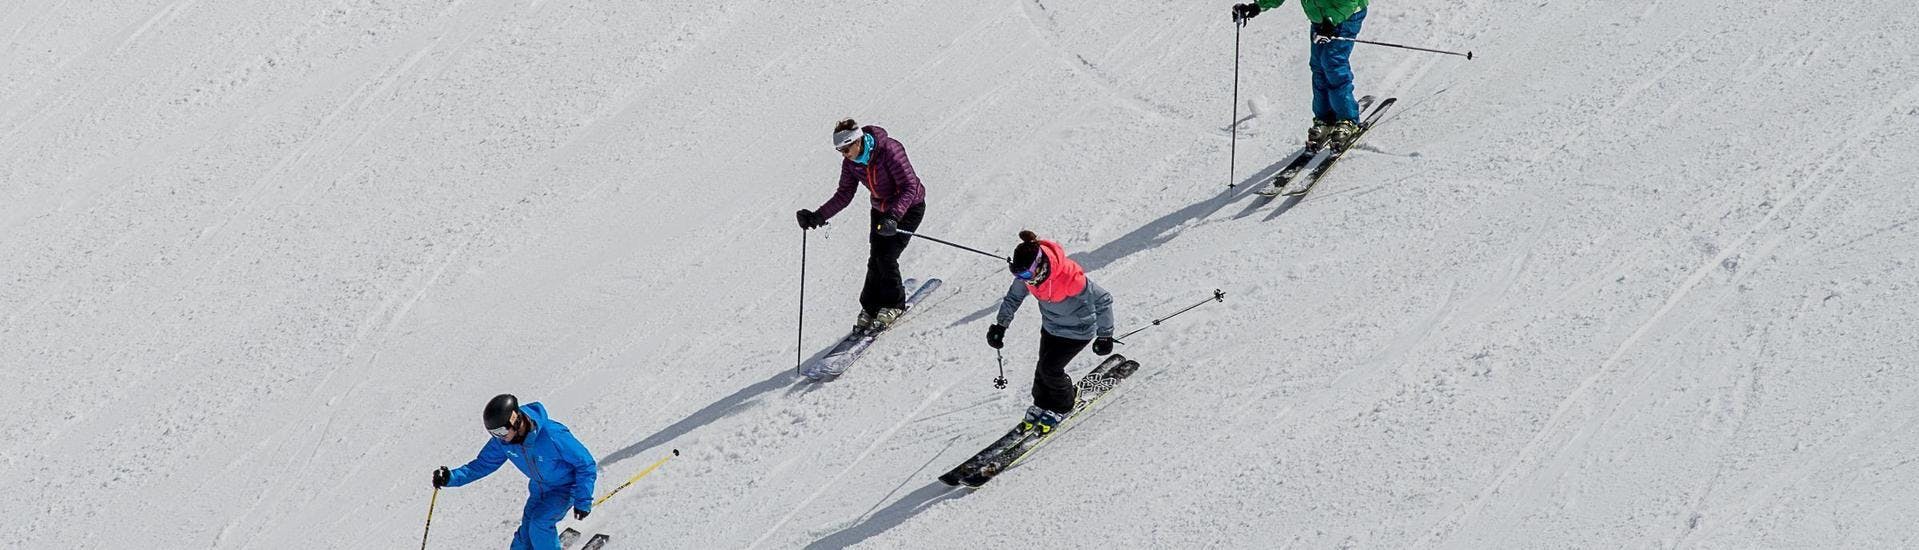 Three skieres are following their ski instructor from the ski school Ski Cool in skiing down a ski slope during one of their Private Ski Lessons for Adults - All Levels - Low Season in the ski resort of Val Thorens.